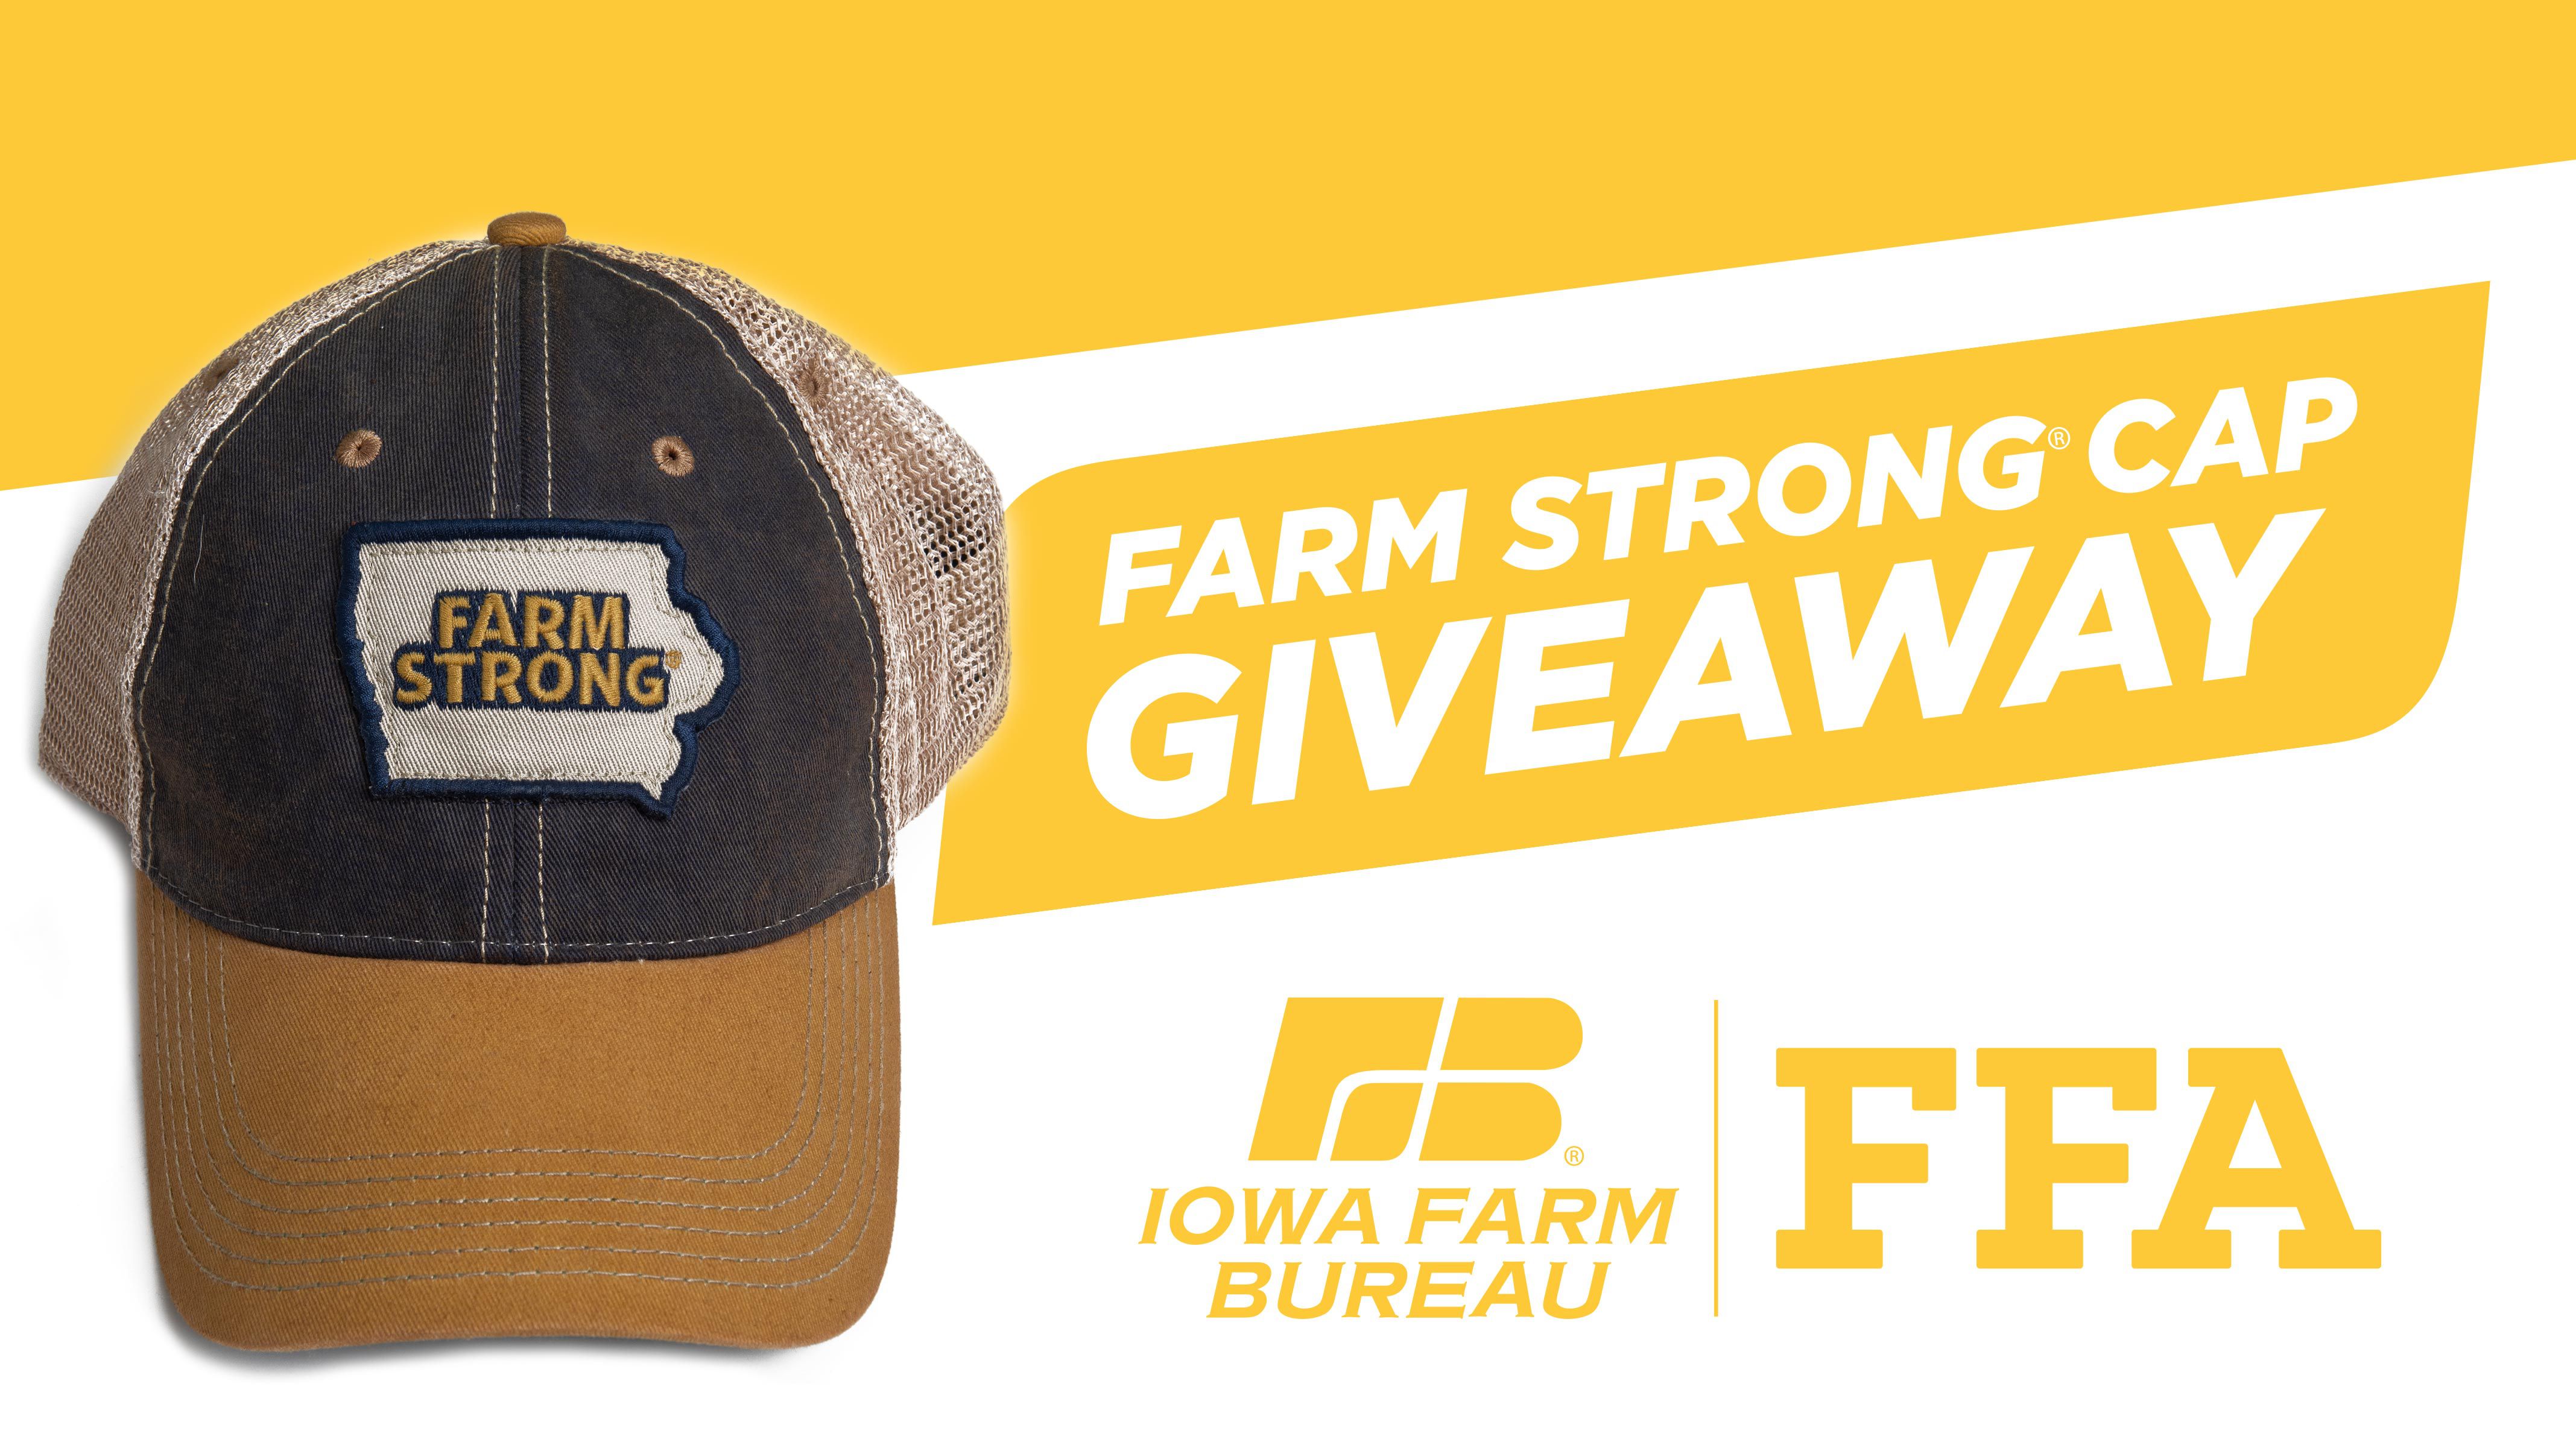 Iowa Farm Bureau invited FFA students and guests to play the Farm Strong Challenge for a chance to win a cool ‘Farm Strong’ cap.